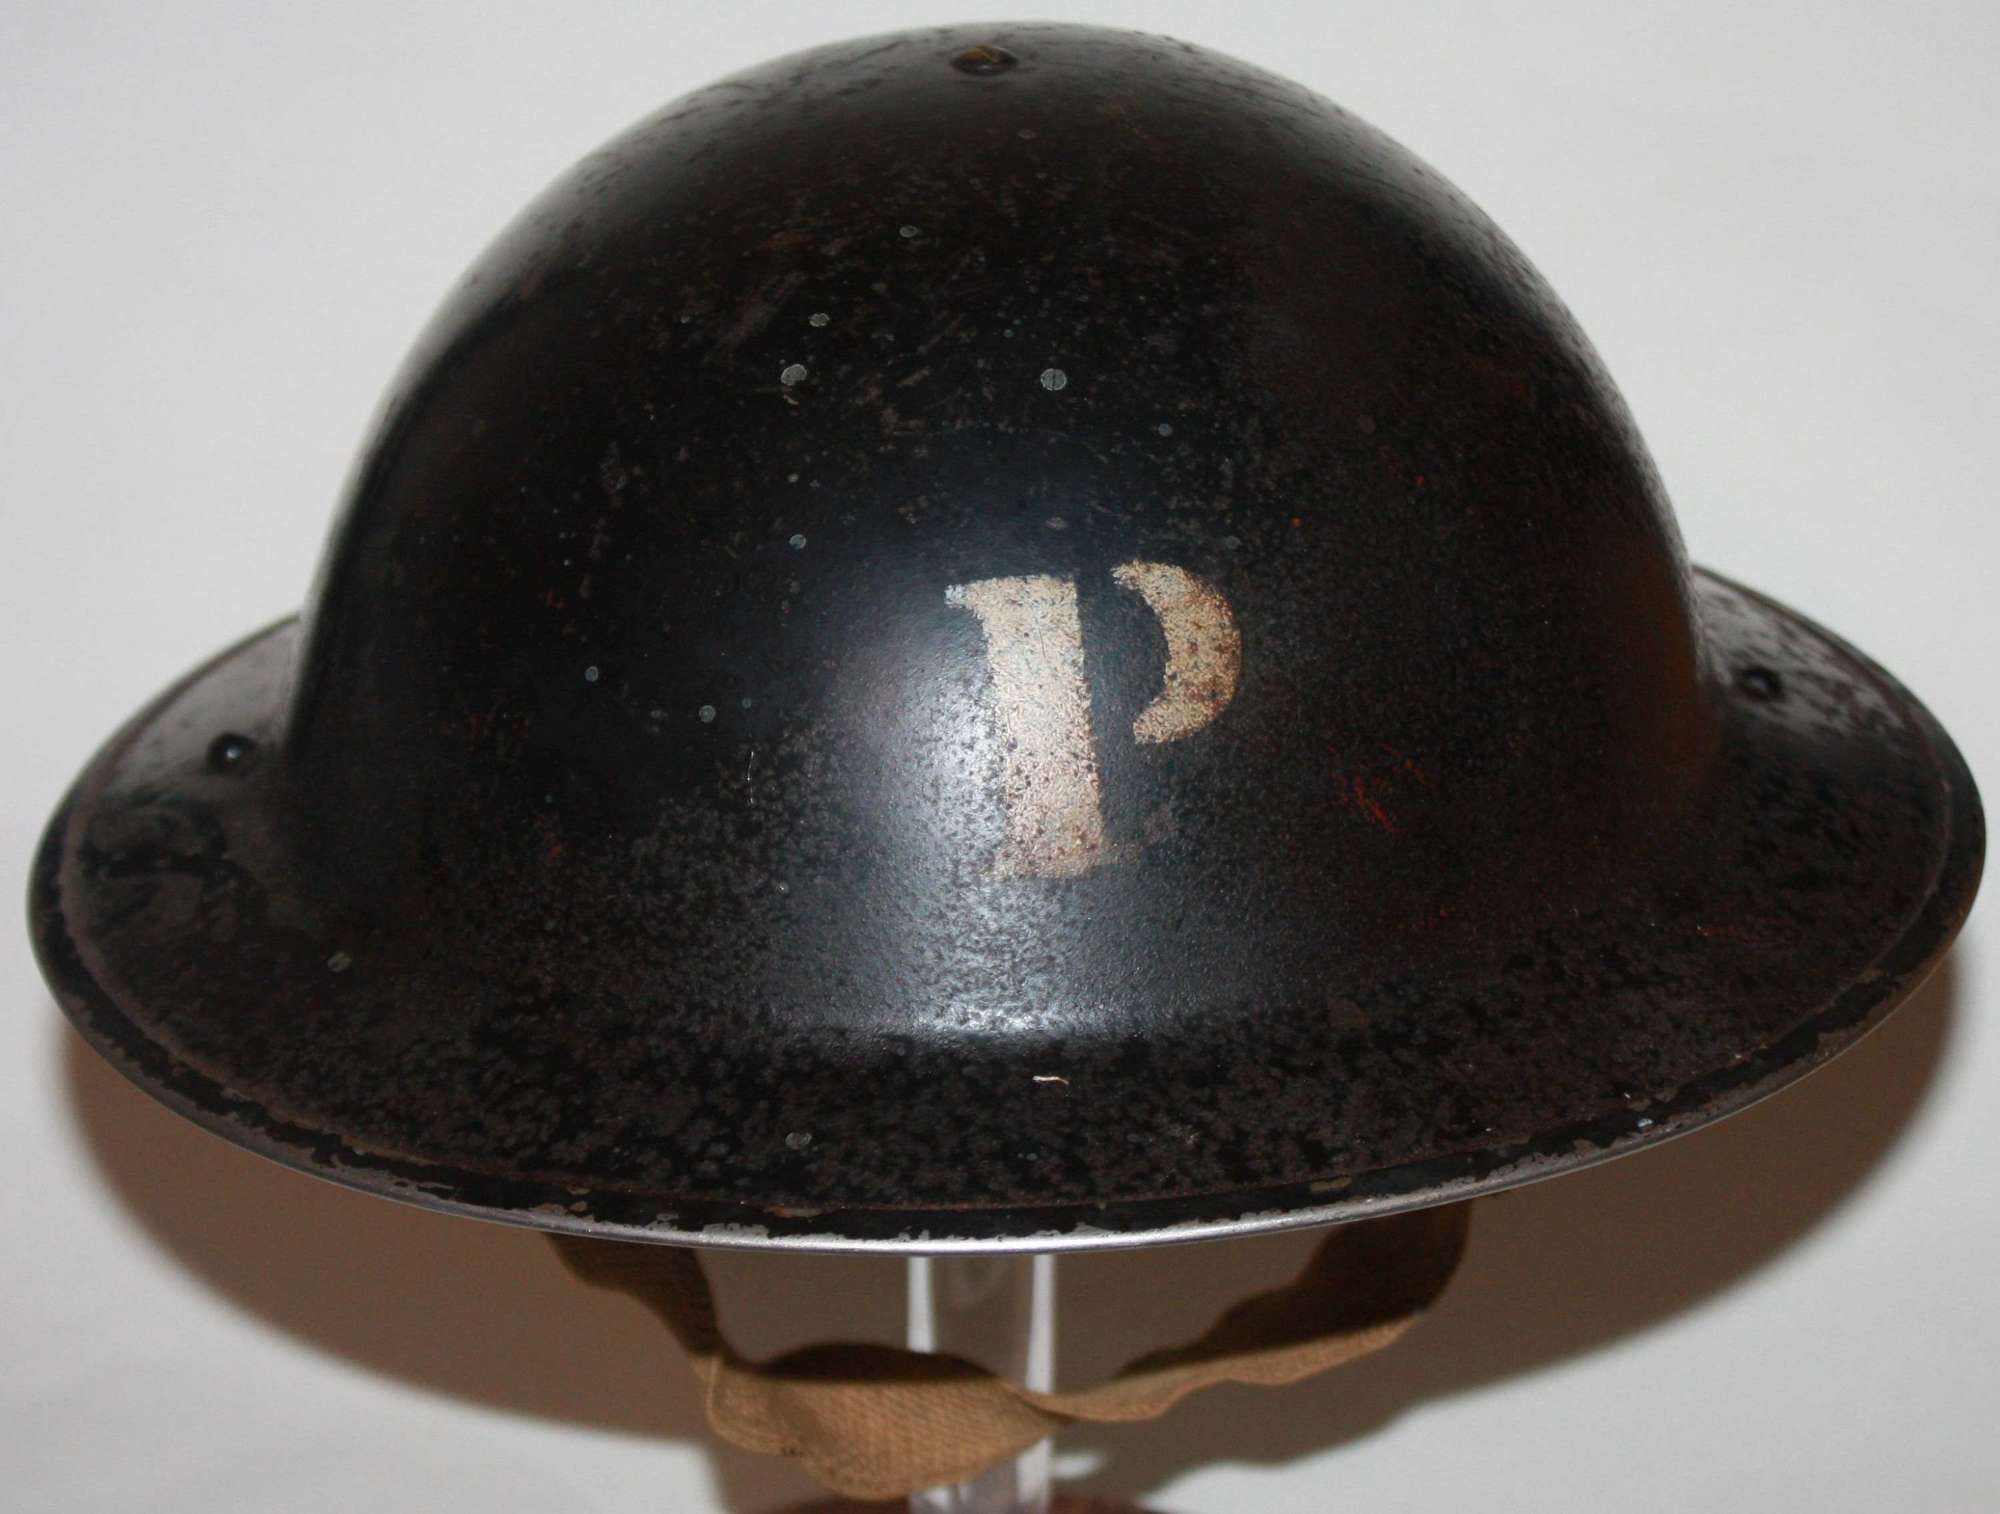 A RARE EXAMPLE OF A CIVIL DEFENCE P MARKED HELMET